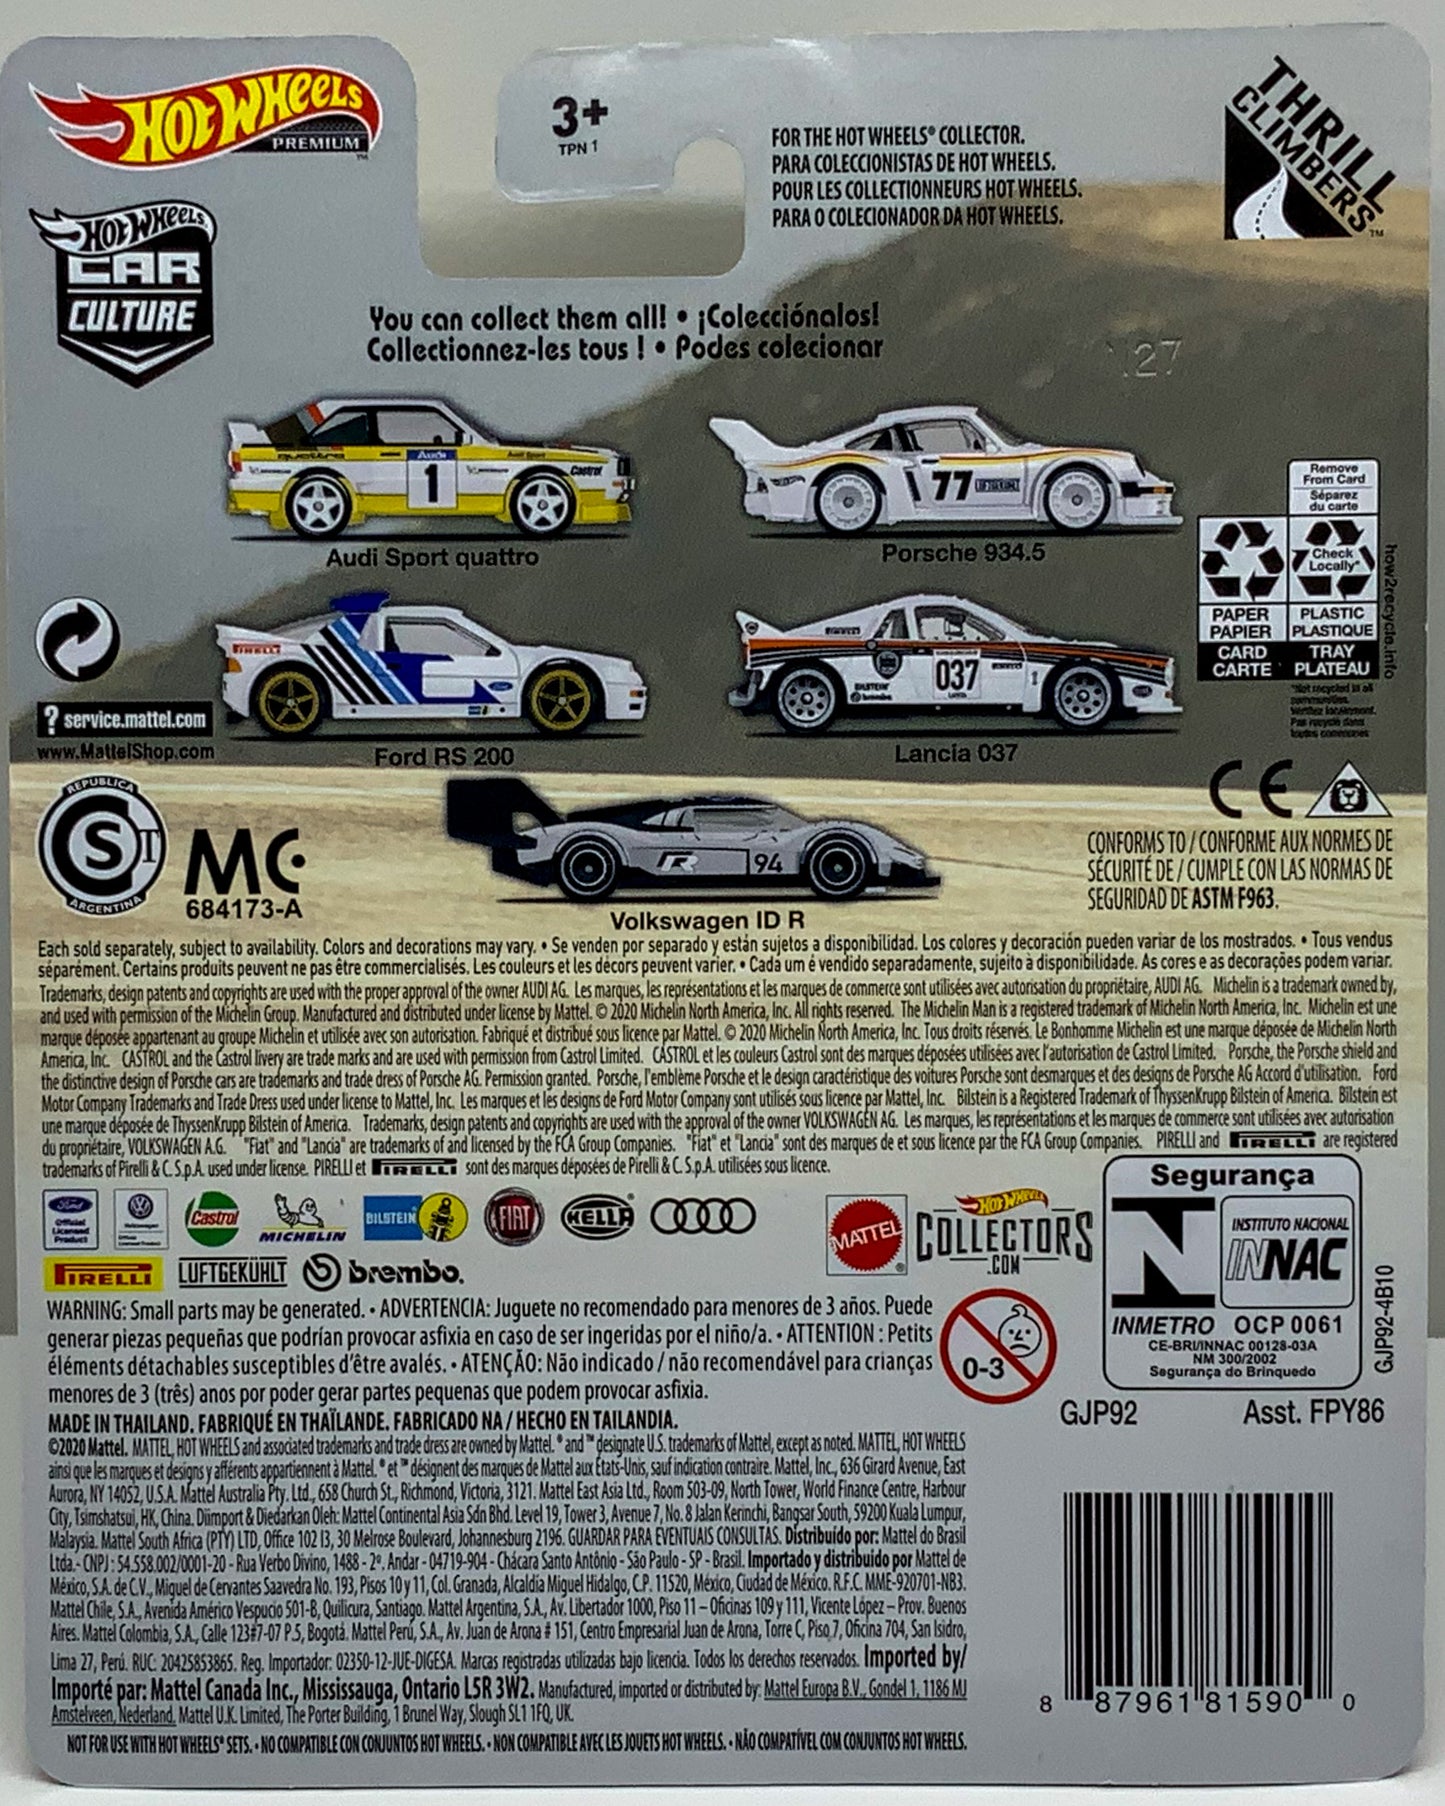 Buy at Tatoy Shop Back of Card shows the 5 Cars on Series Audi, Porsche, Ford, Lancia, Volkswagen Premium Collections